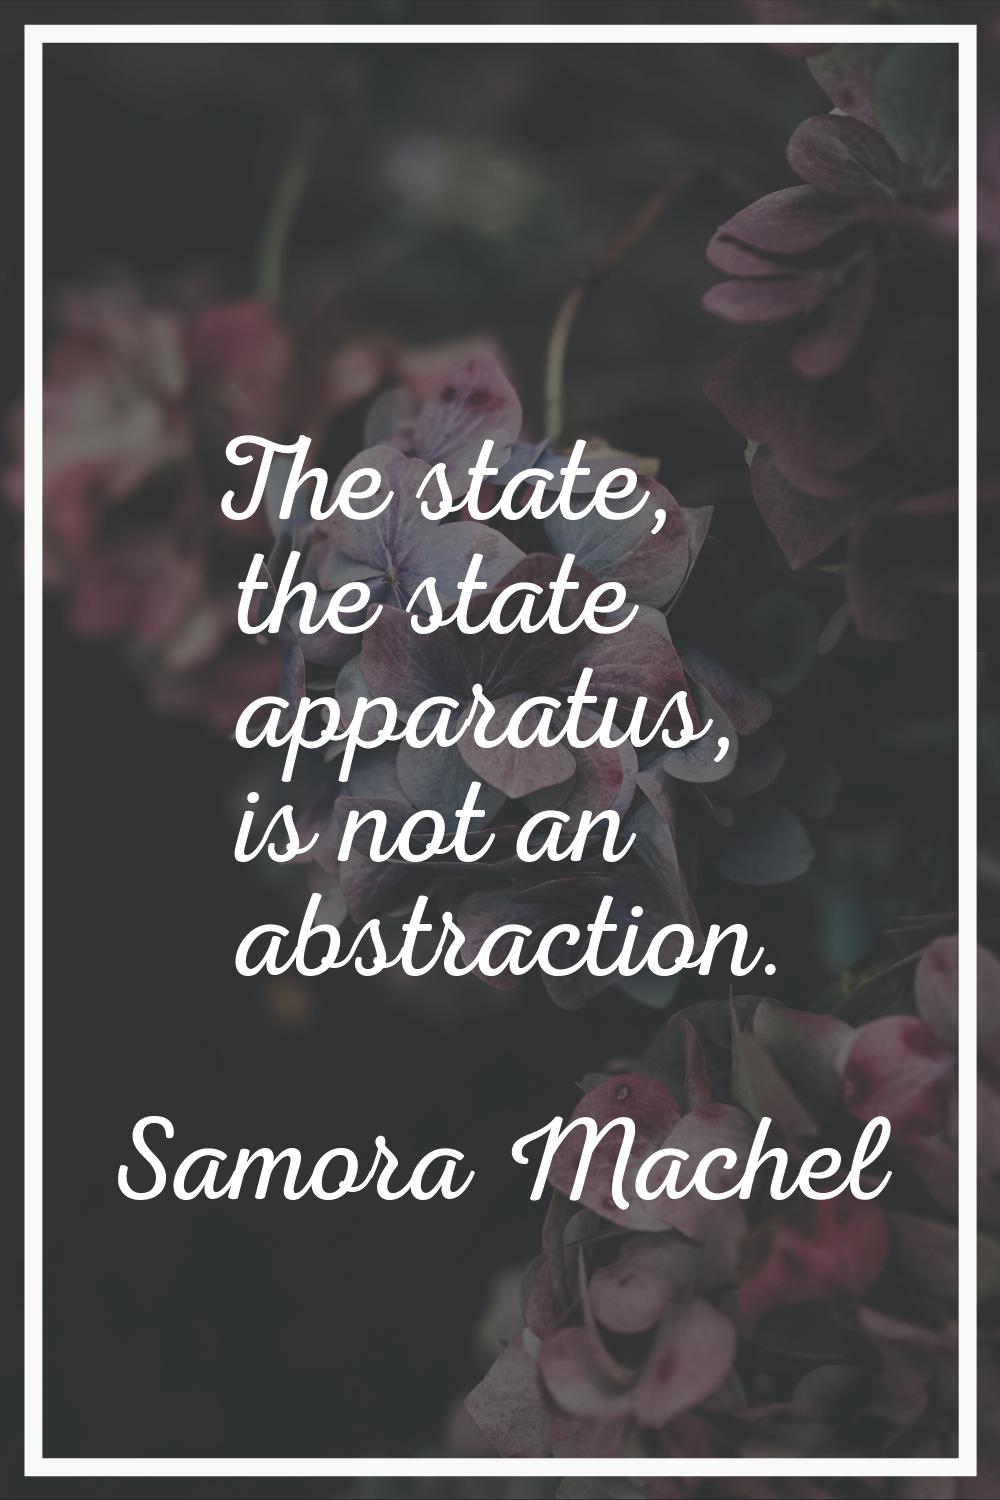 The state, the state apparatus, is not an abstraction.